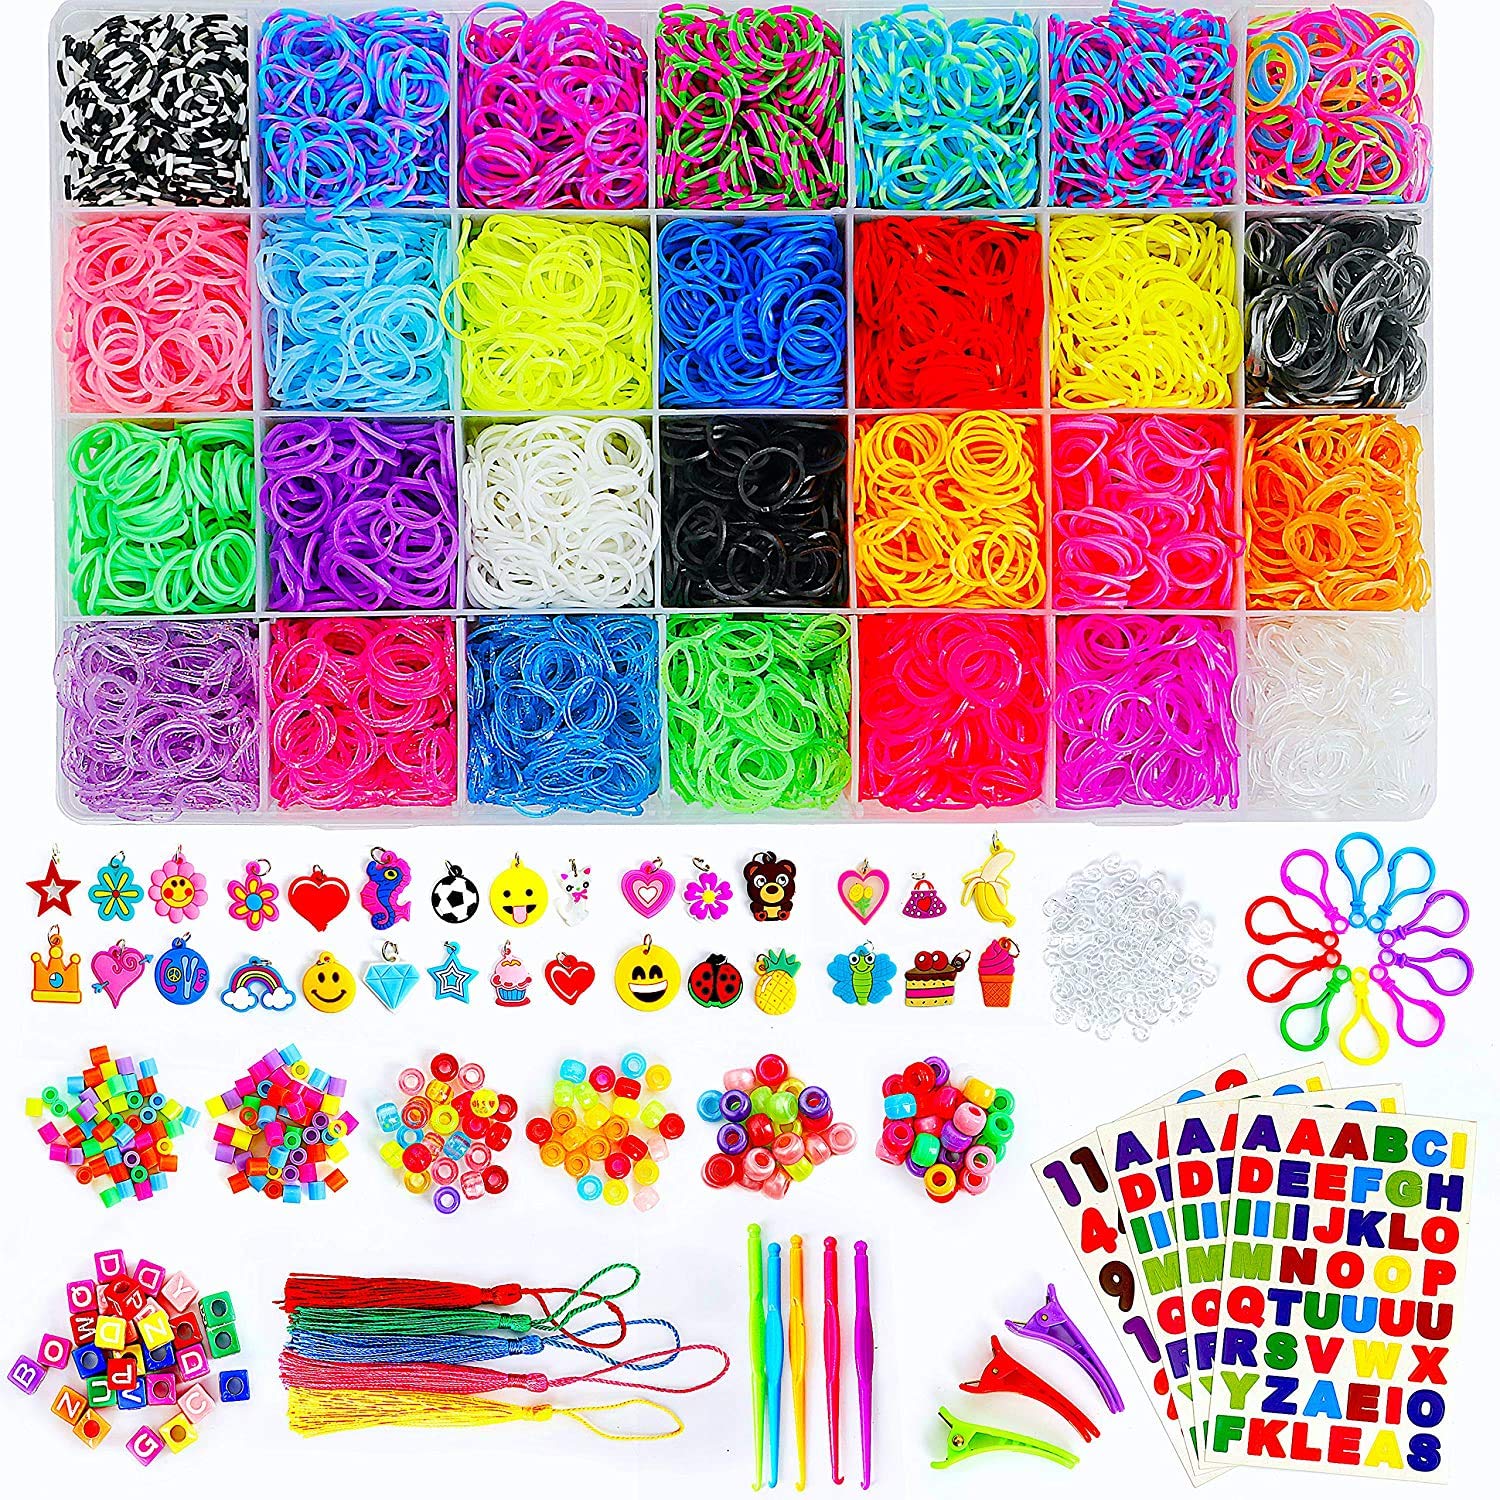 12000+ Loom Rubber Bands Bracelet Kit, Big Giftable Case with Premium Quality Accessories, 28 Unique Bright Colour Bands, Refill Kit for Girls & Boys by Momo's Den